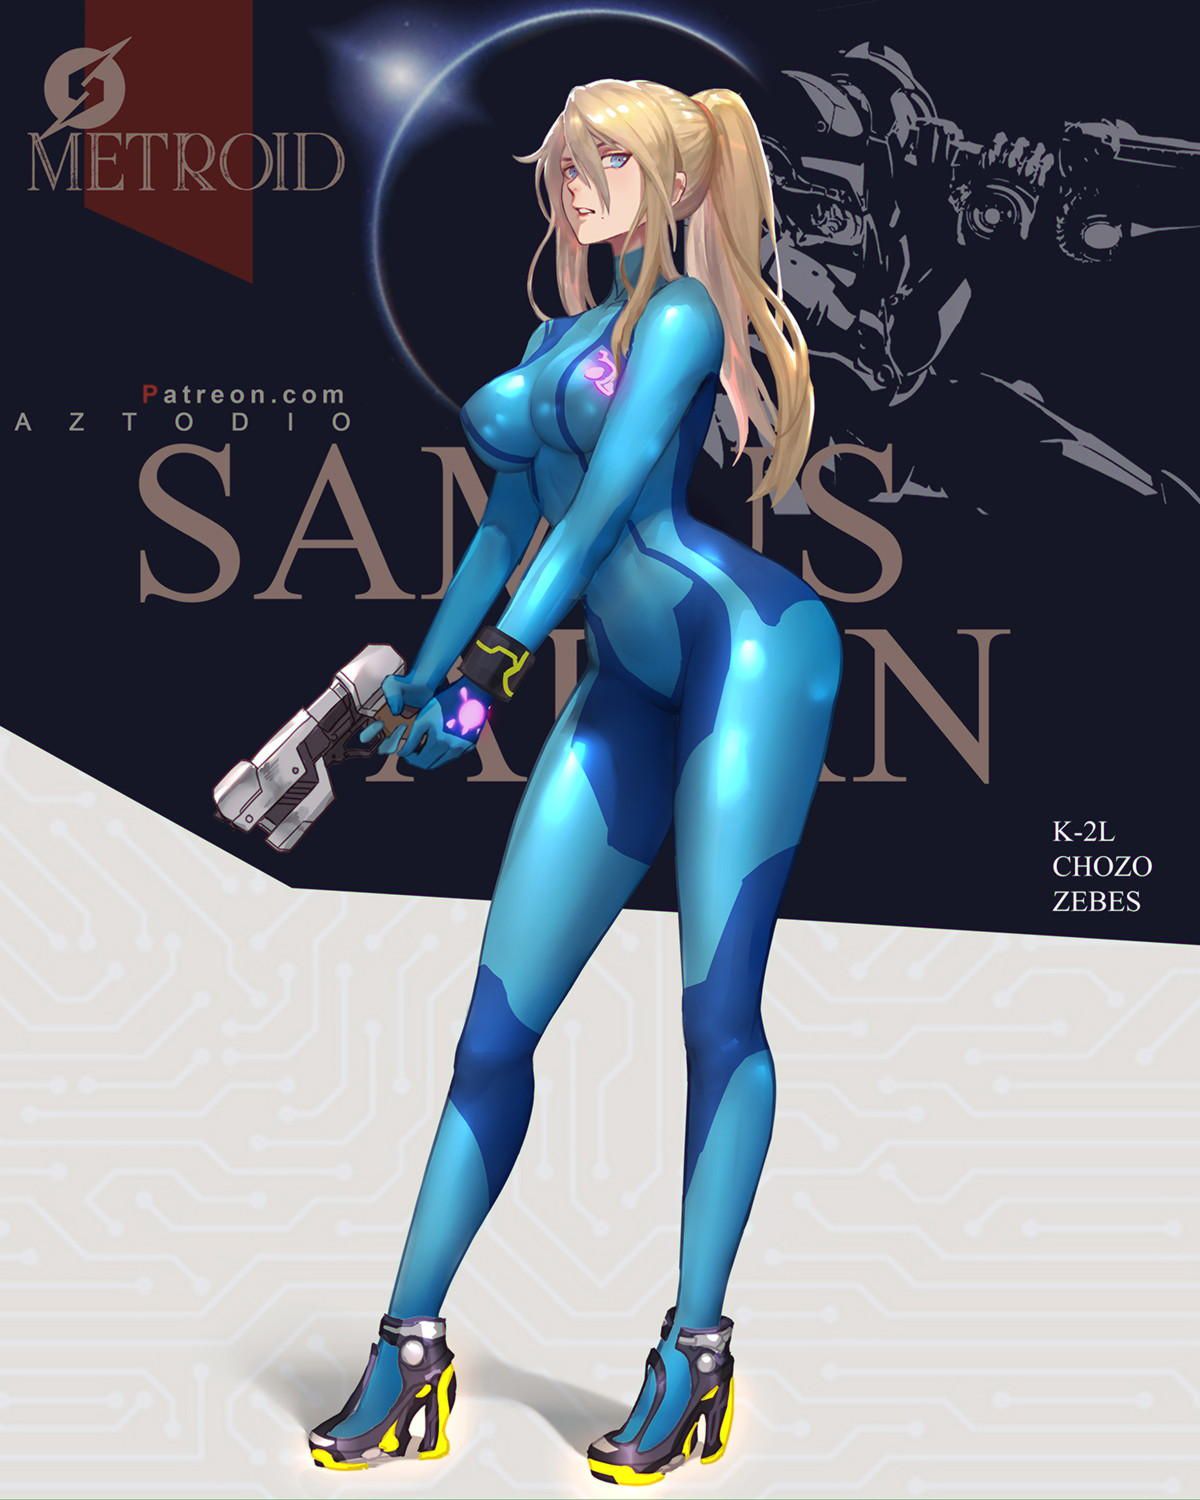 Metroid's secondary erotic imagery. 15